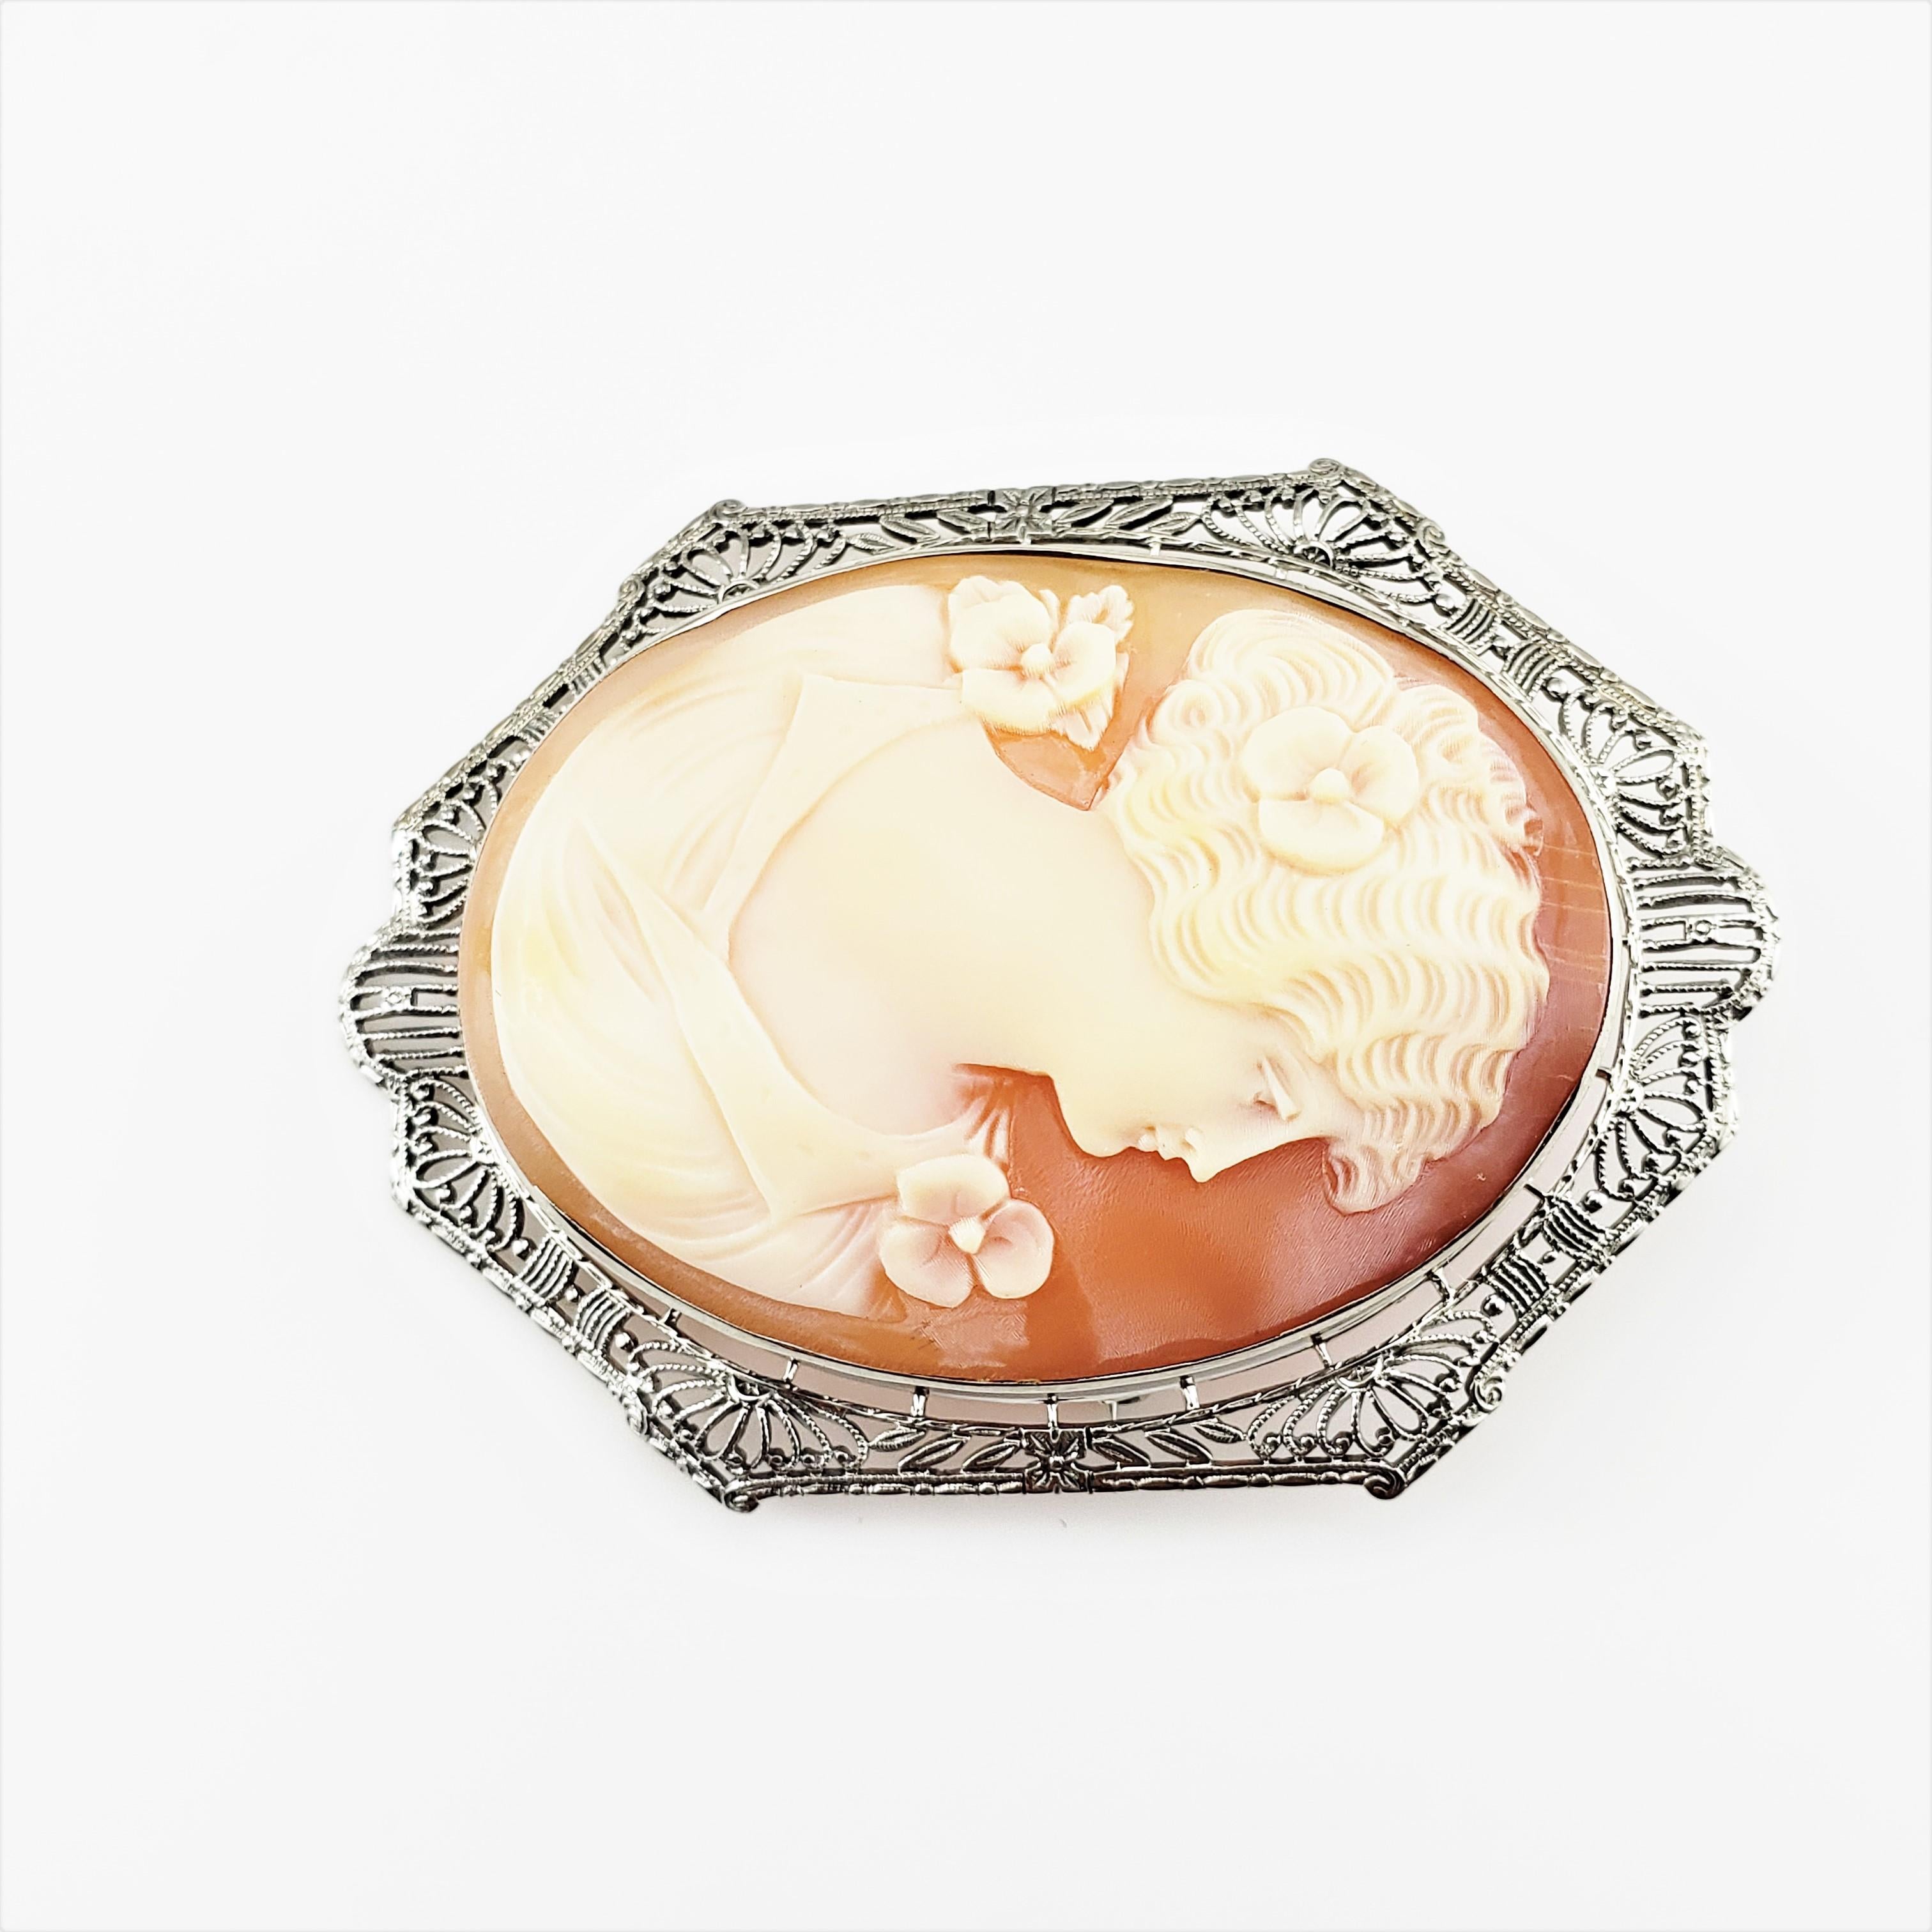 14 Karat White Gold Filigree Cameo Brooch In Good Condition For Sale In Washington Depot, CT